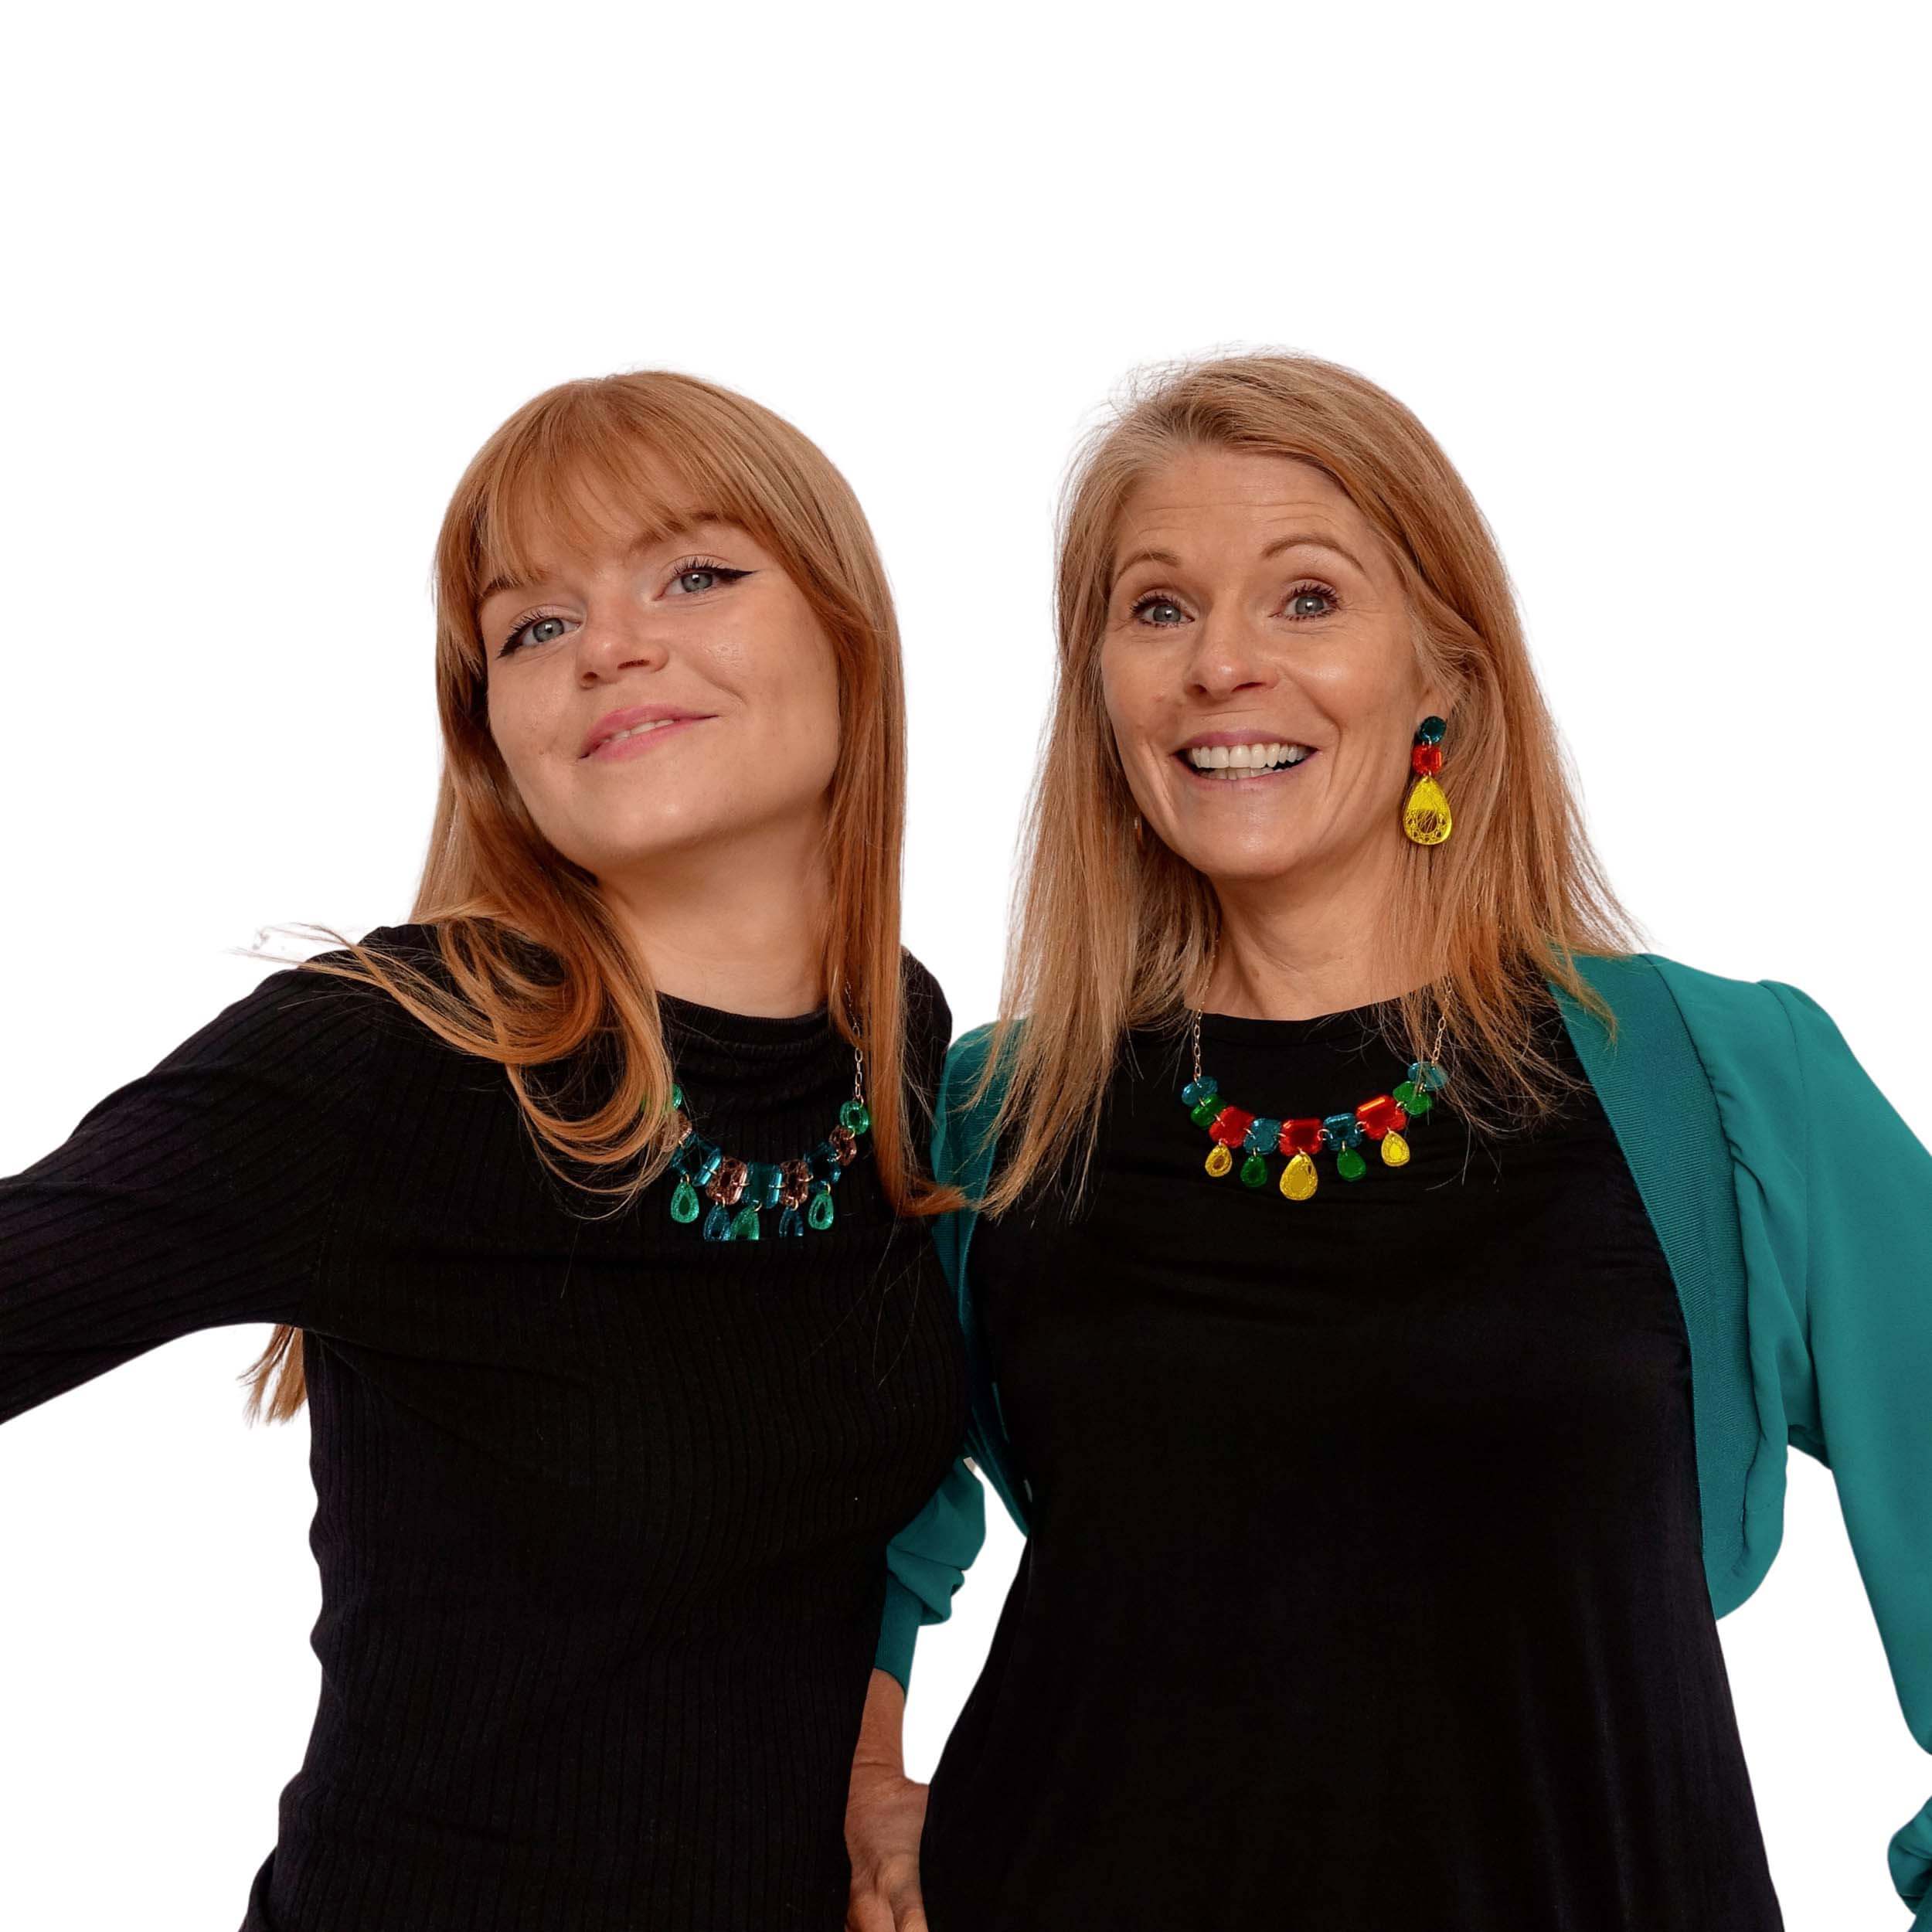 Sarah and Eliza modelling necklaces and earrings from The Austerity Jewels collection. Eliza wearing a teal époque necklace and Sarah wearing matching large earrings and necklace in flame mambo. 